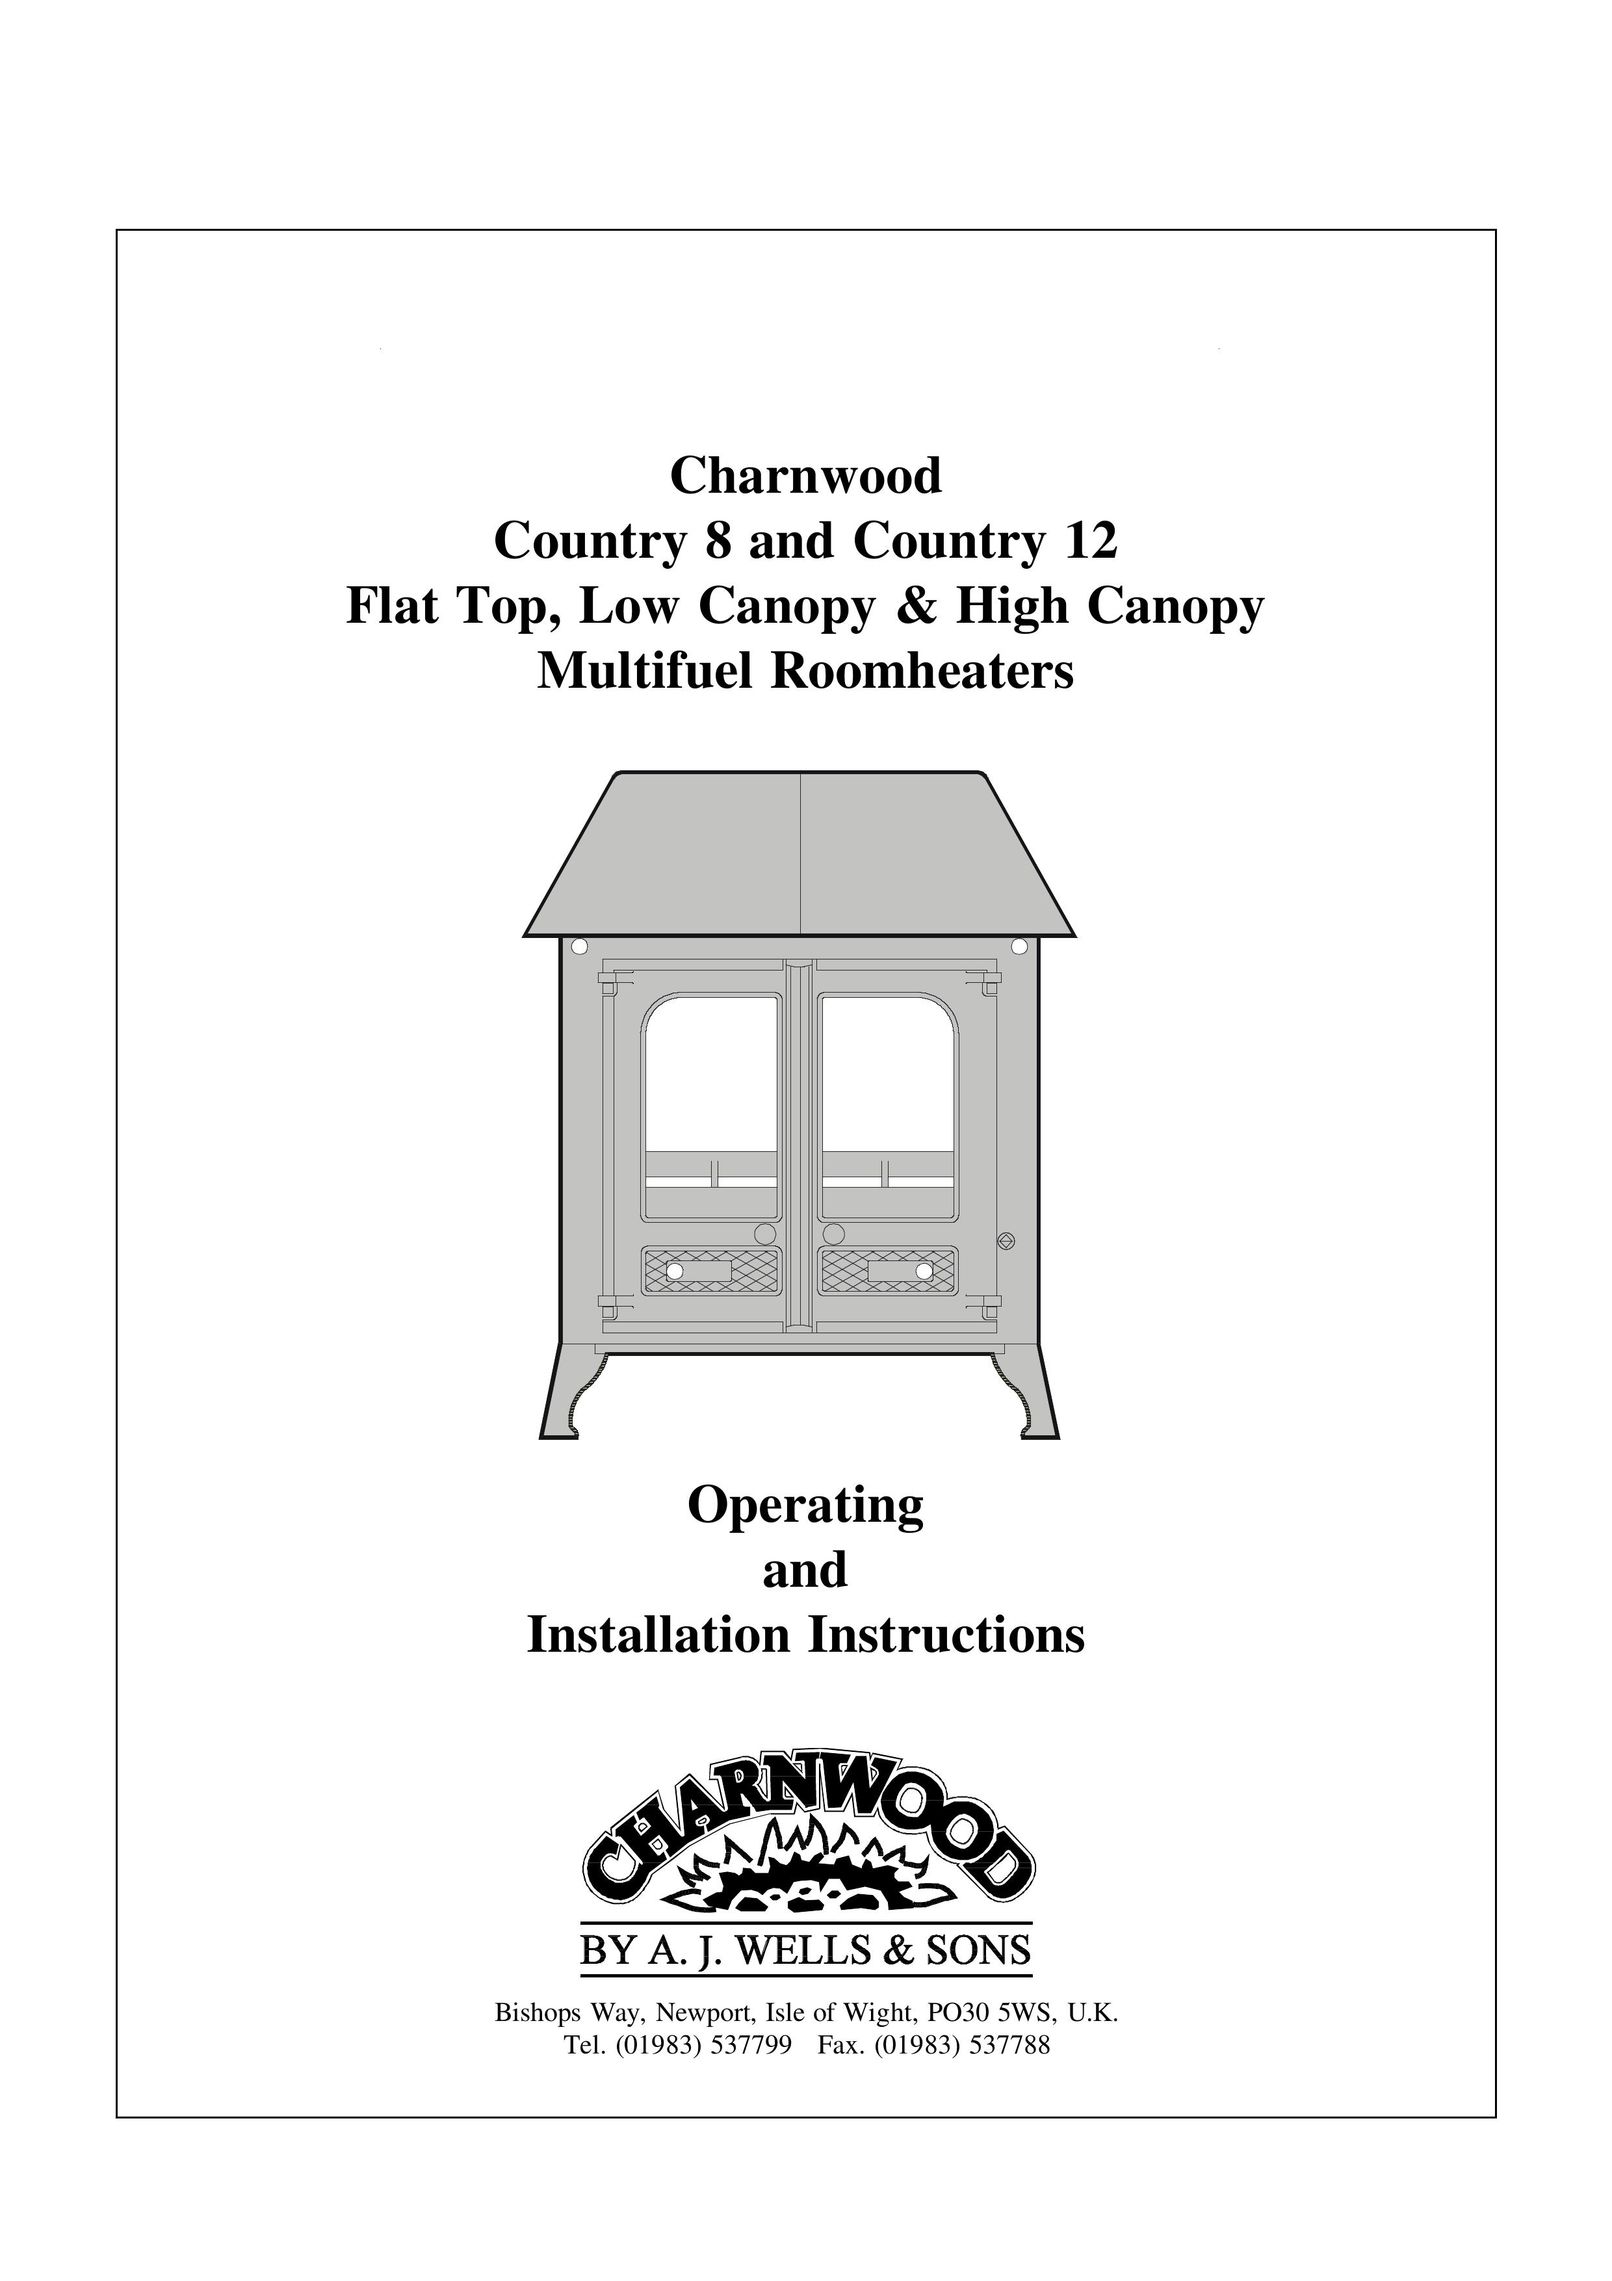 Charnwood Country 12 Electric Heater User Manual